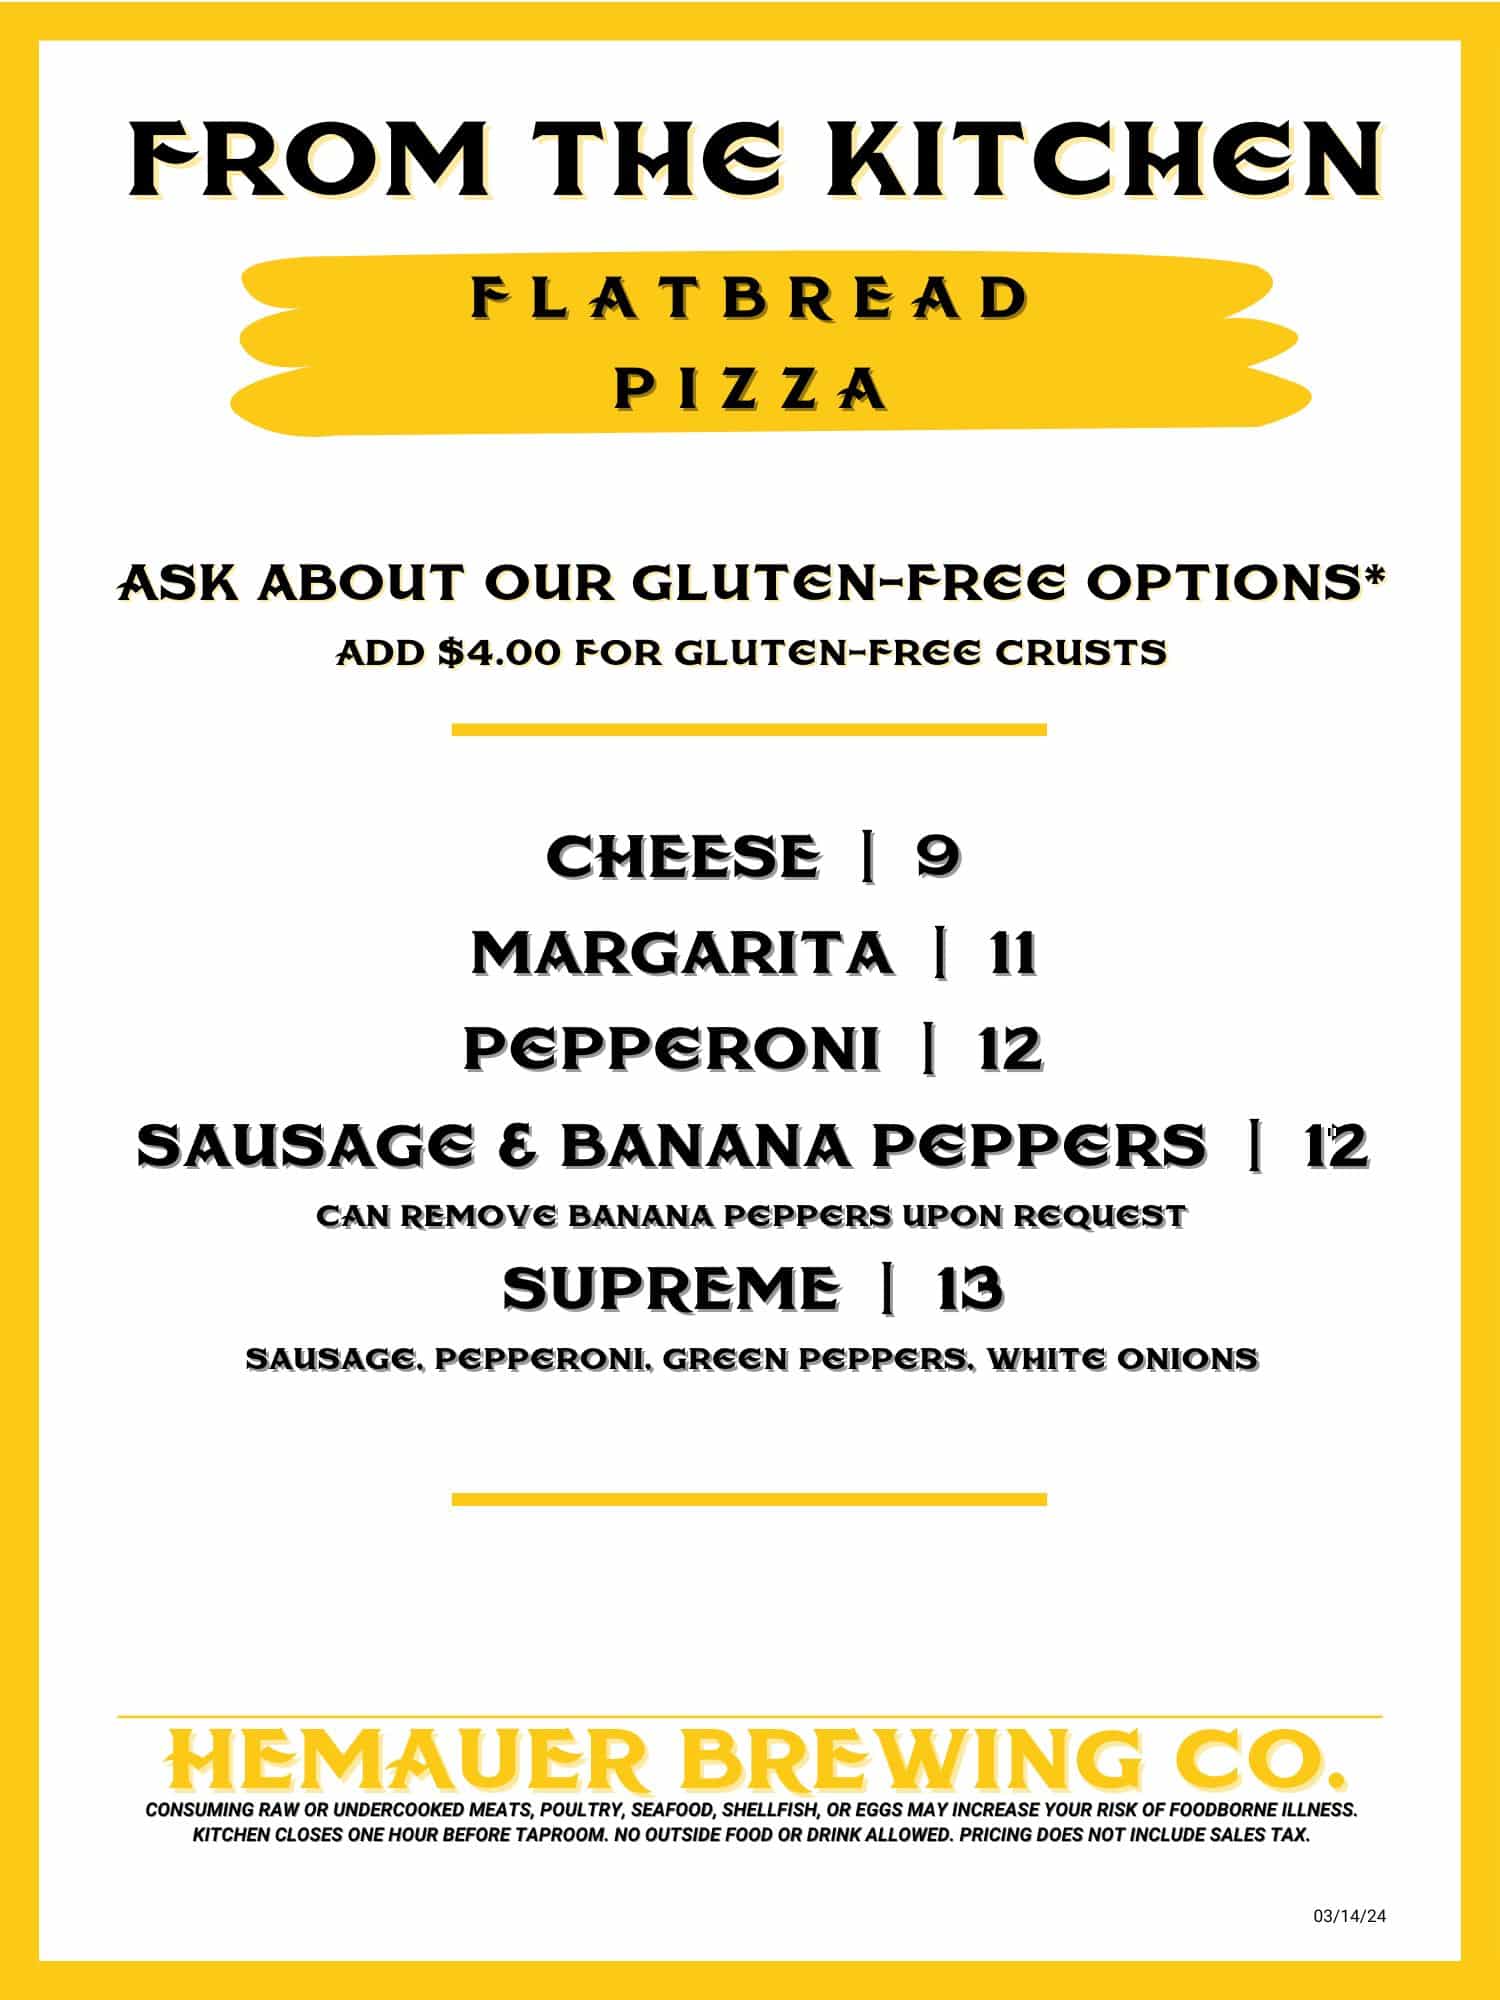 Mechanicsburg, PA, taproom, Hemauer Brewing Co has fresh-made flatbread pizza. Gluten-free options available. 